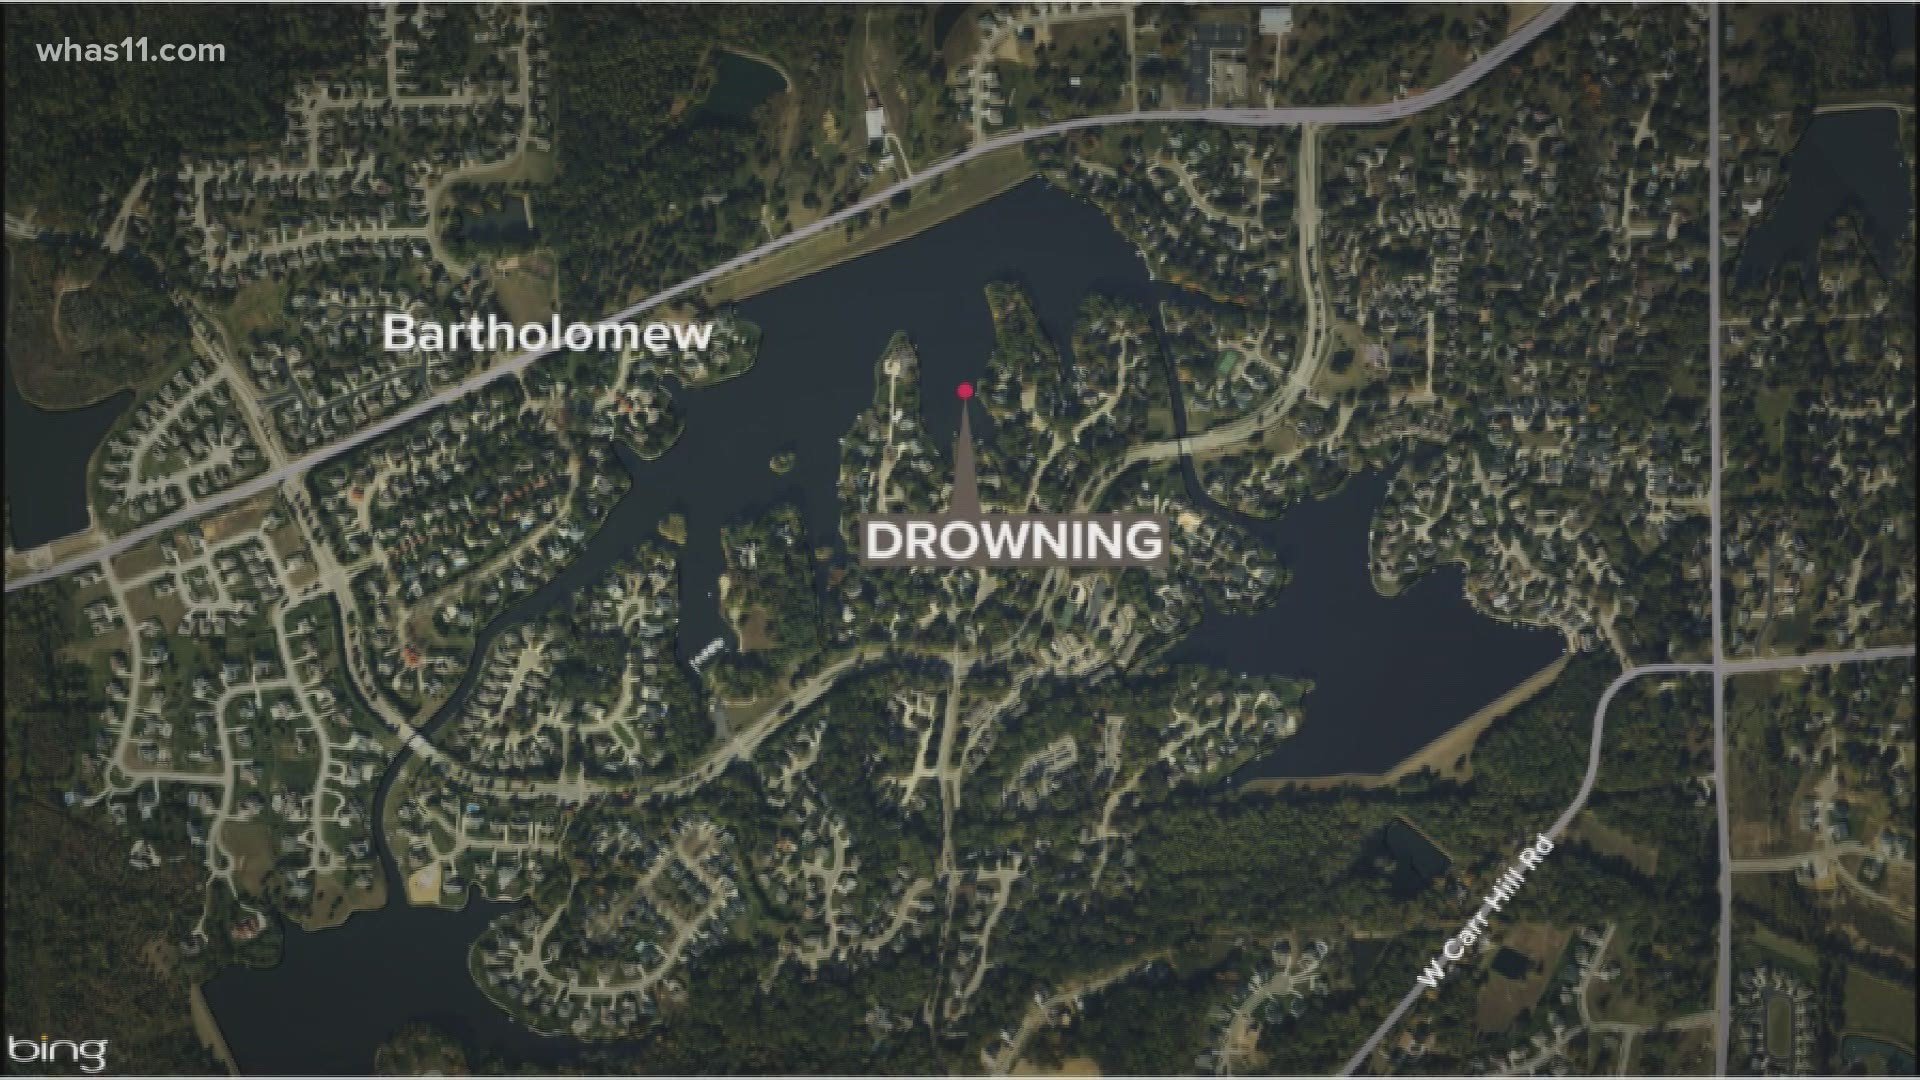 Authorities said the teen drowned at Tipton Lake while swimming with friends Saturday night.